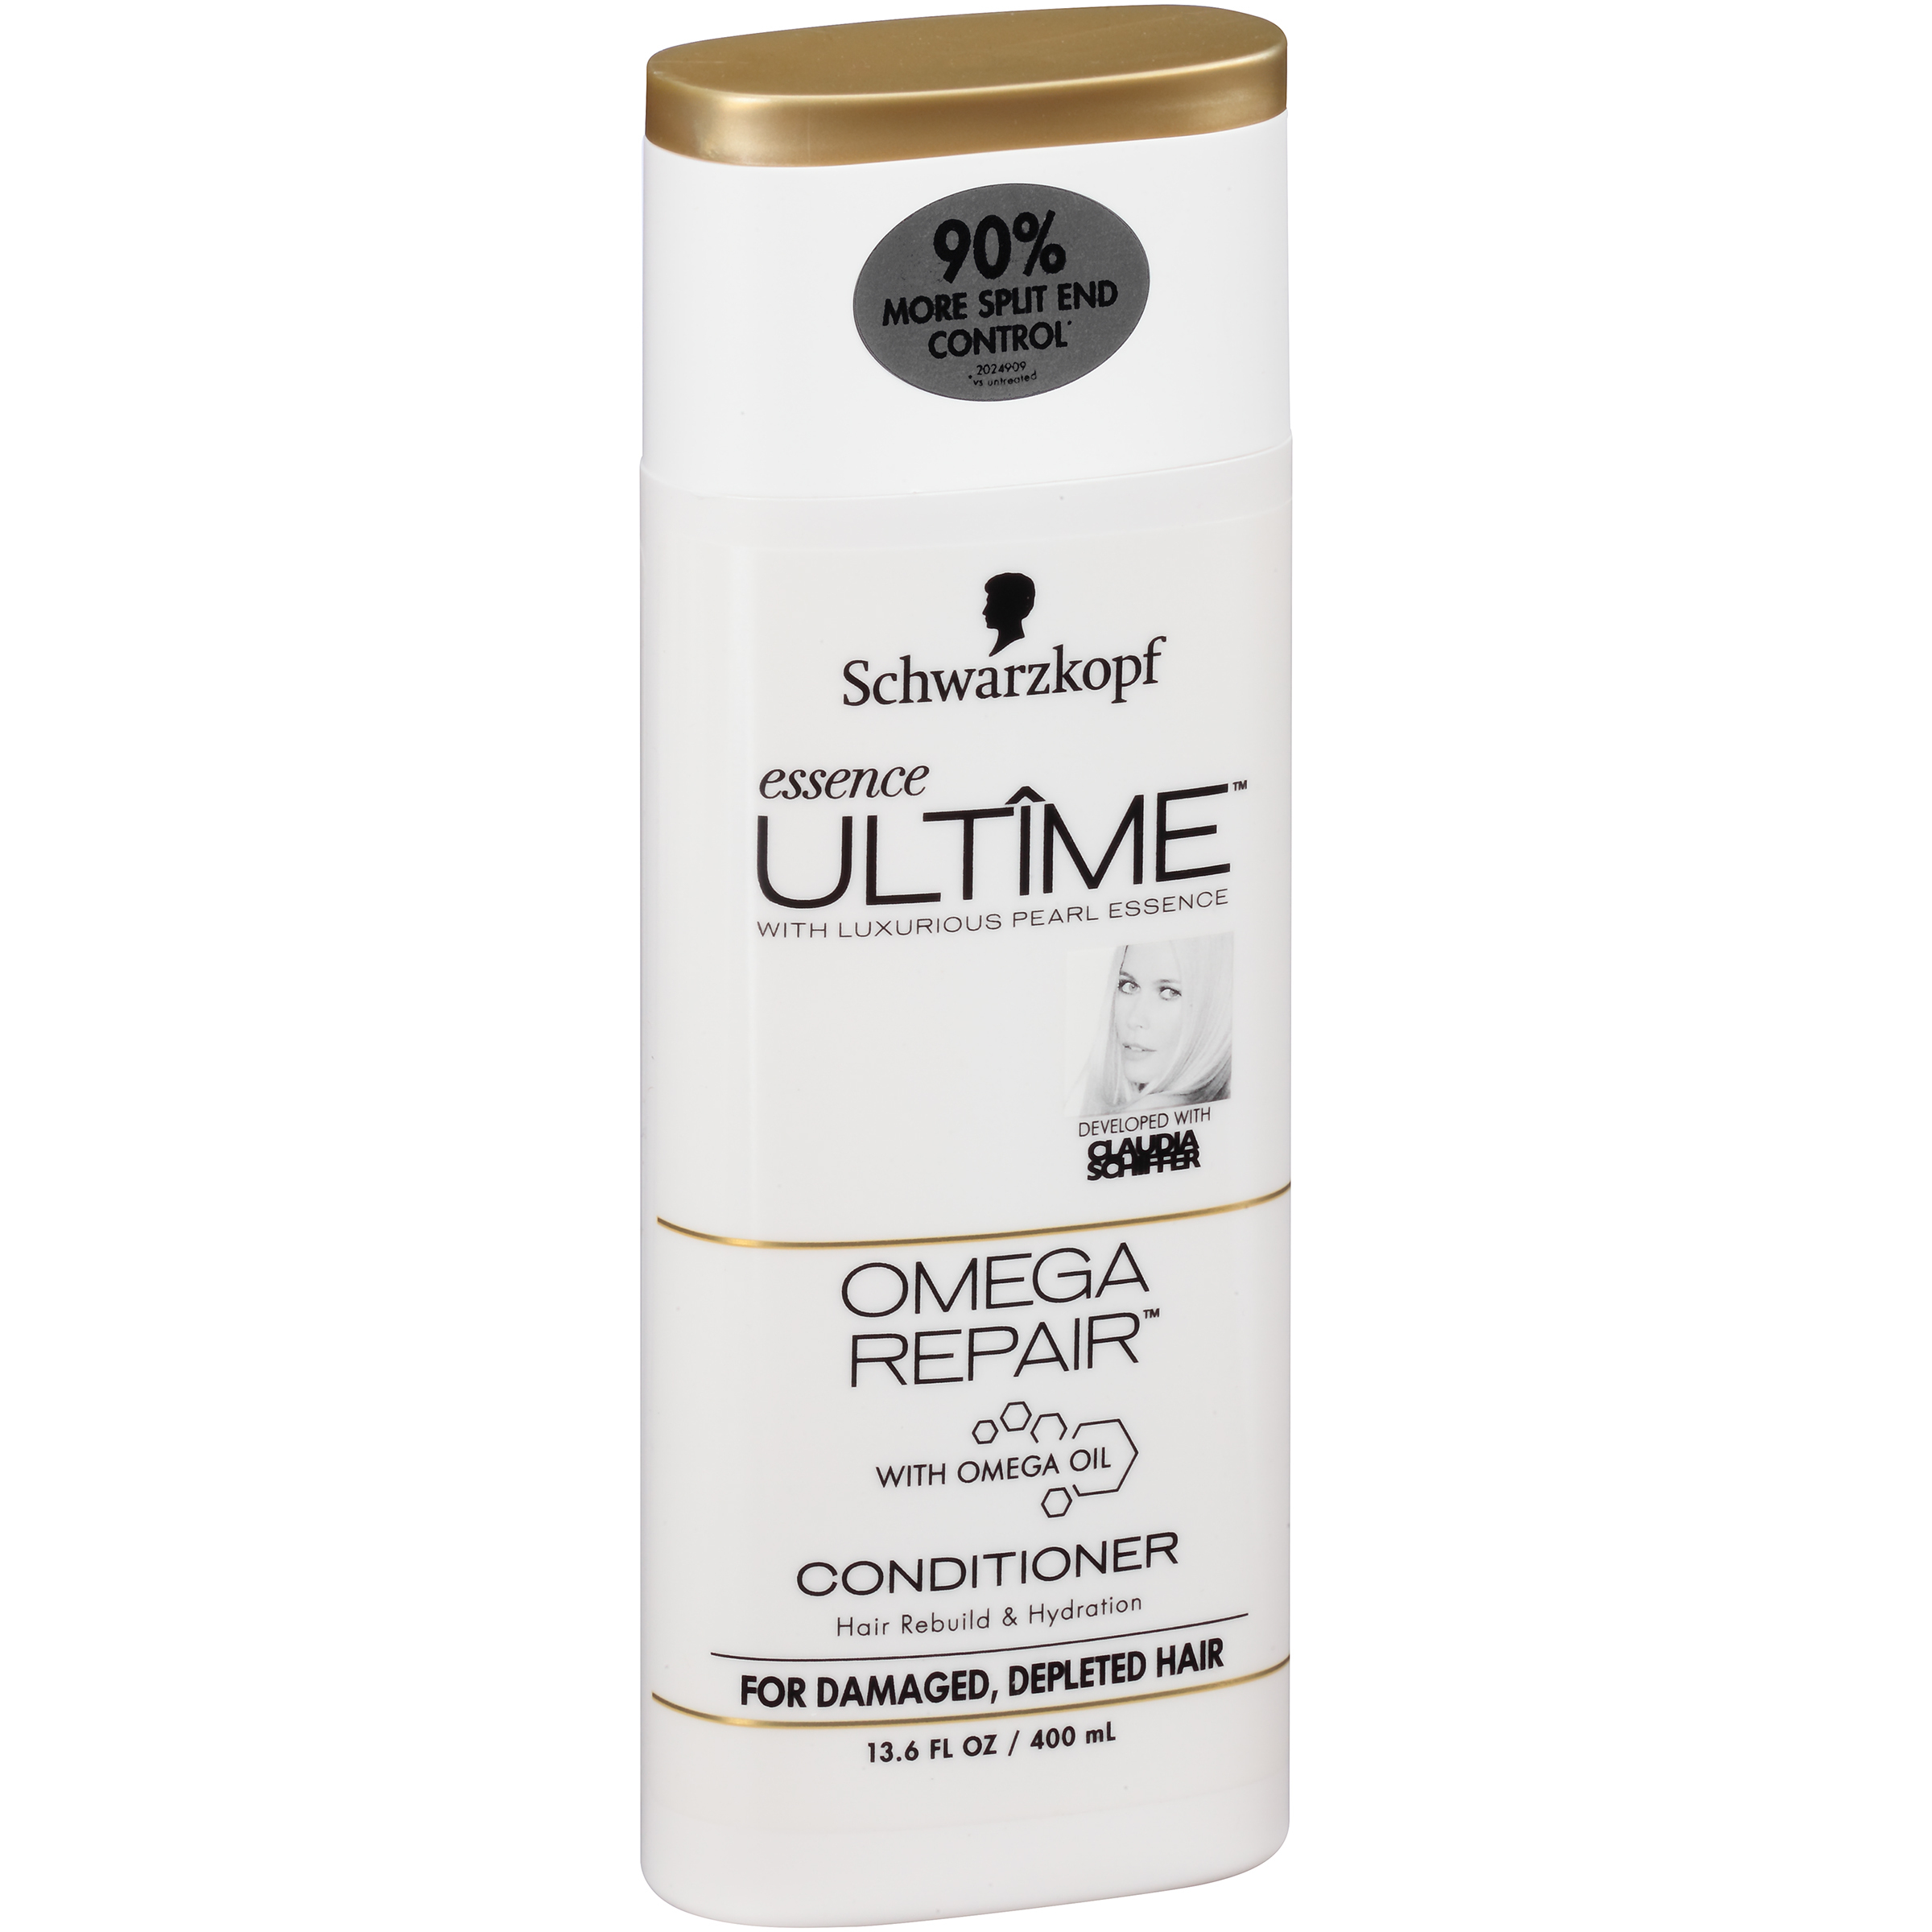 Ultime Conditioner Omega Repair 13.6oz 6 Pack - image 2 of 4